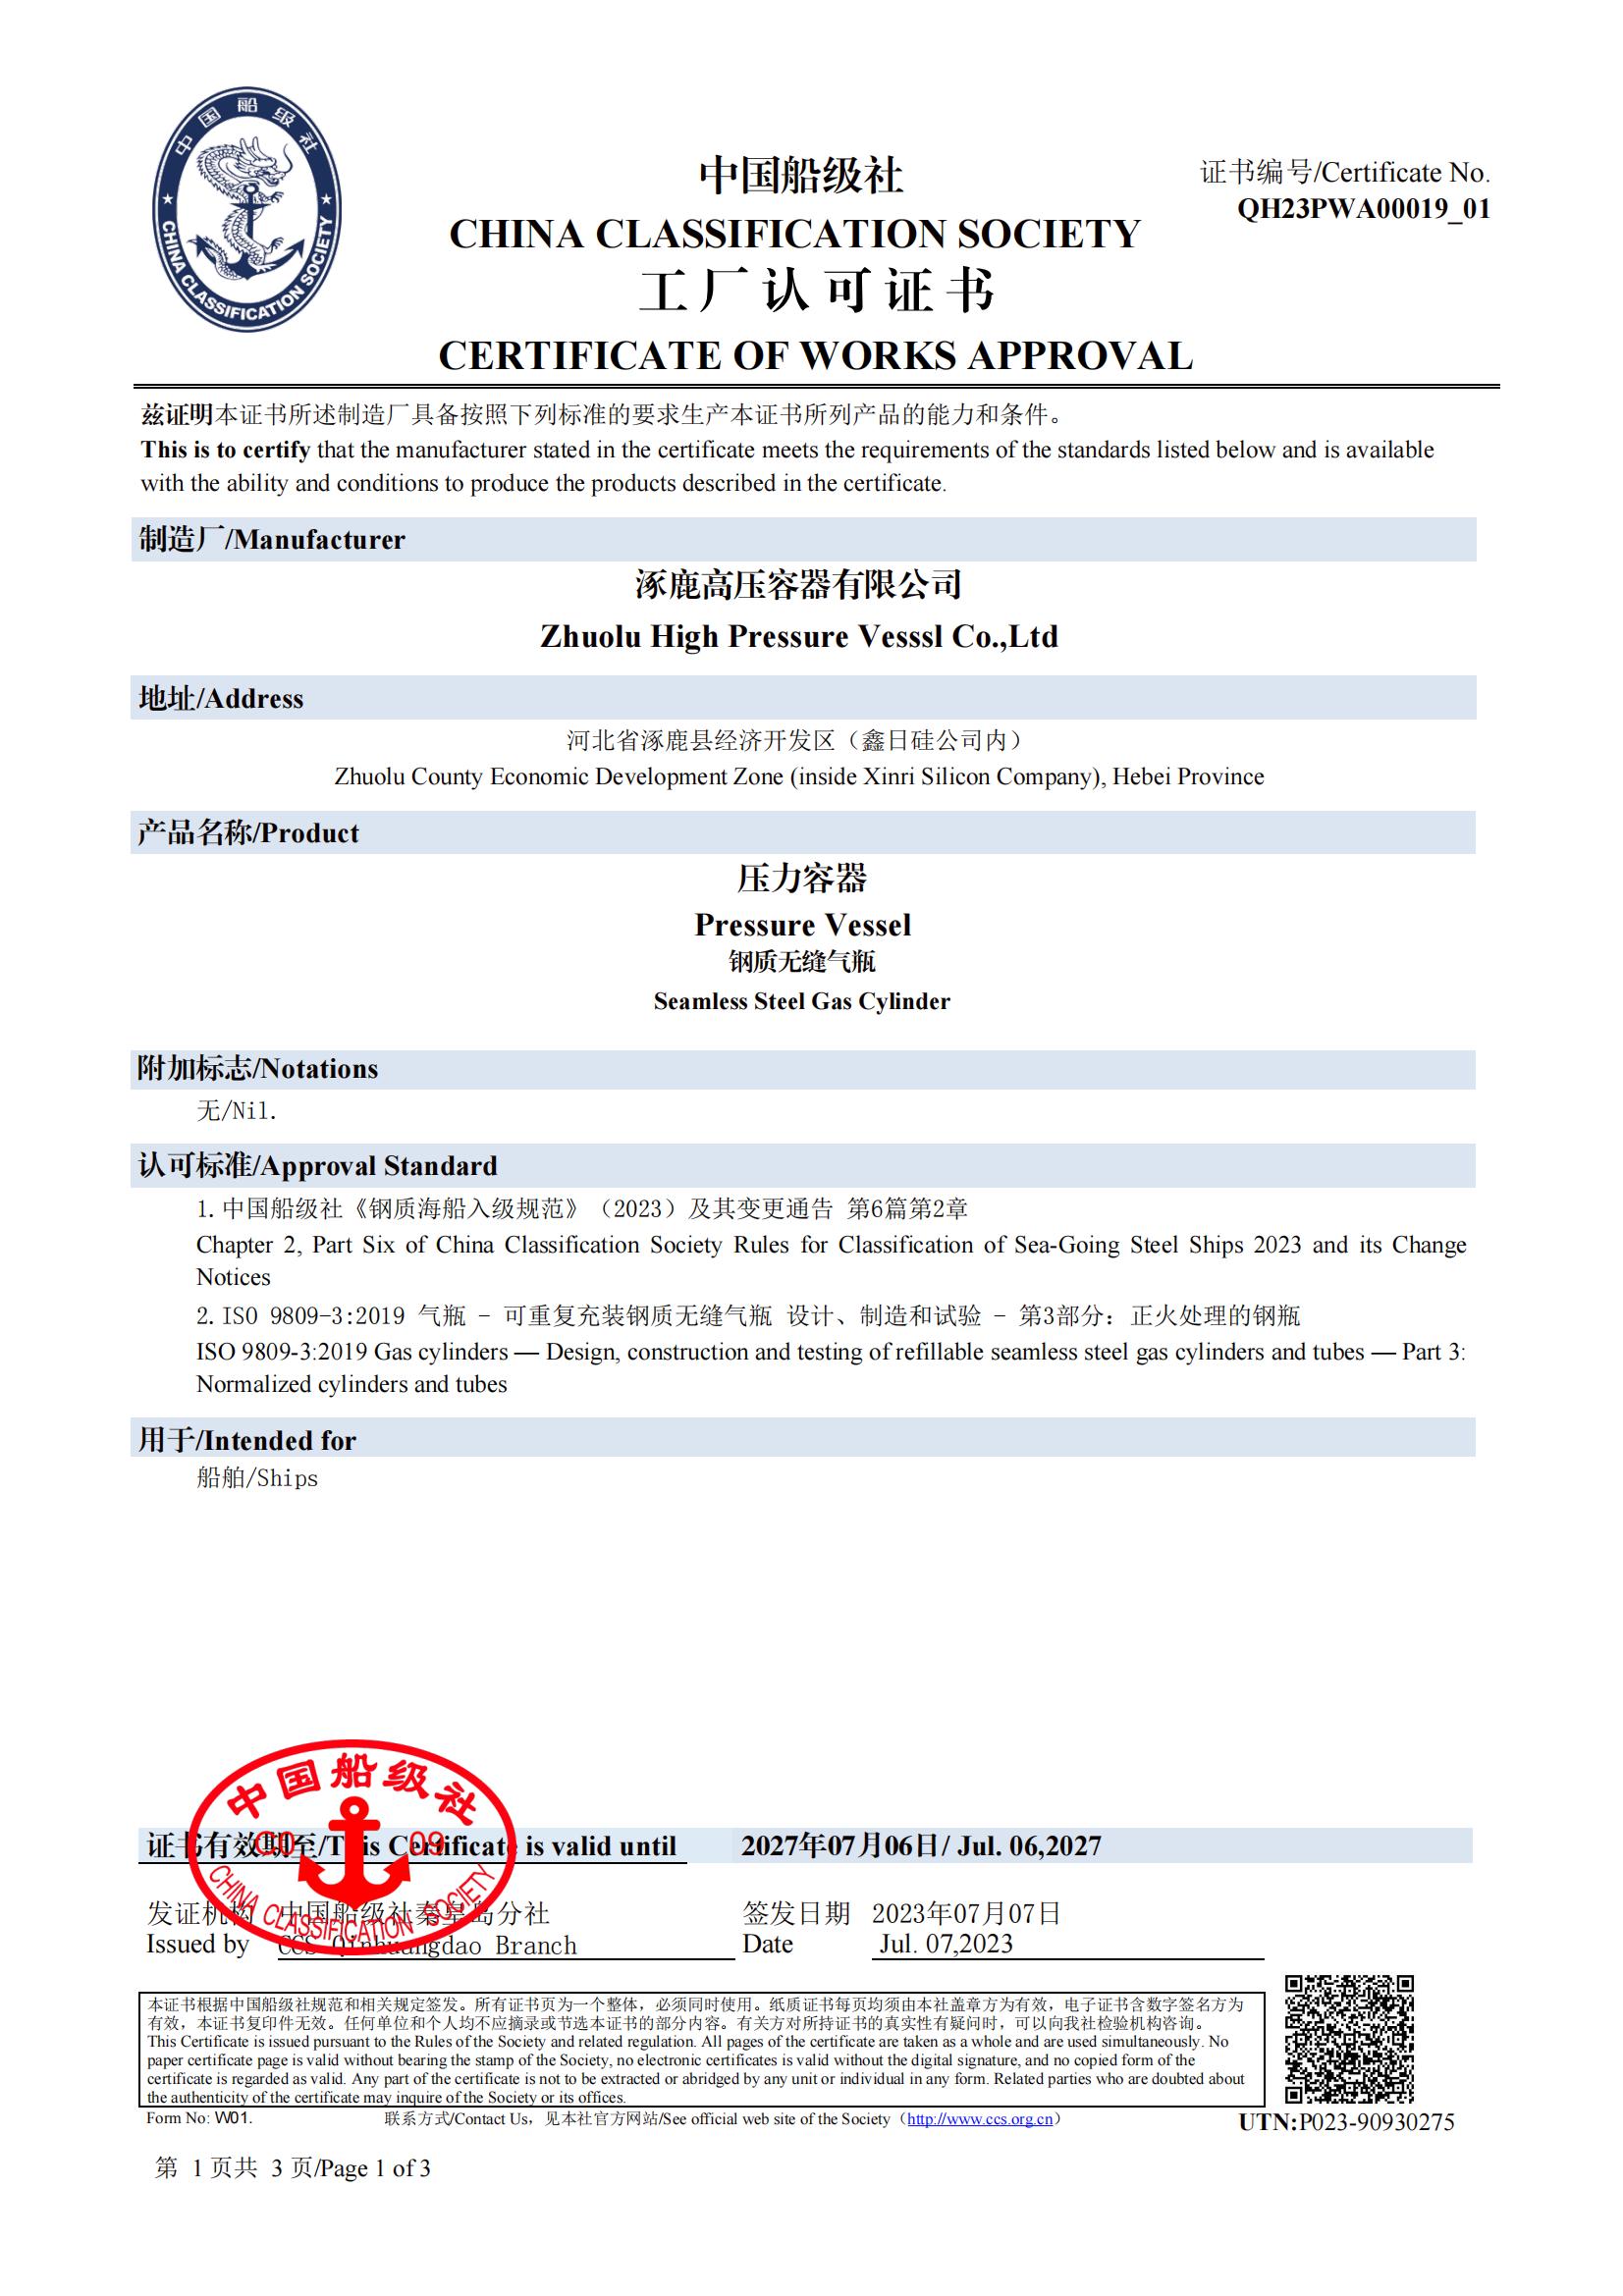 Good news, our company won the factory accreditation certificate of pressure vessel China Classification Society